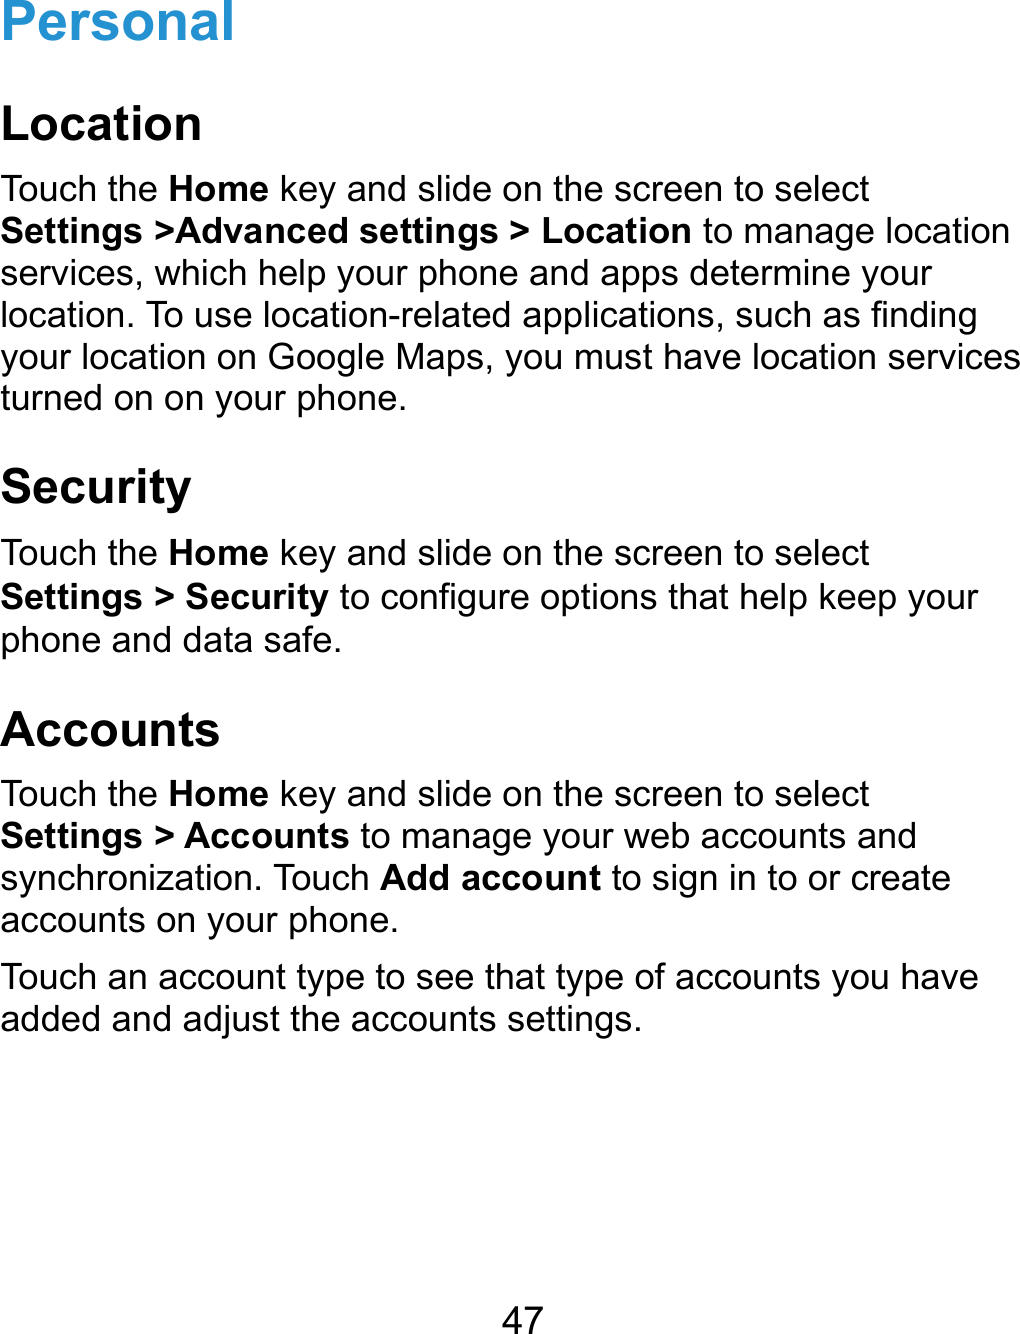  47 Personal Location Touch the Home key and slide on the screen to select Settings &gt;Advanced settings &gt; Location to manage location services, which help your phone and apps determine your location. To use location-related applications, such as finding your location on Google Maps, you must have location services turned on on your phone. Security Touch the Home key and slide on the screen to select Settings &gt; Security to configure options that help keep your phone and data safe. Accounts Touch the Home key and slide on the screen to select Settings &gt; Accounts to manage your web accounts and synchronization. Touch Add account to sign in to or create accounts on your phone. Touch an account type to see that type of accounts you have added and adjust the accounts settings.   